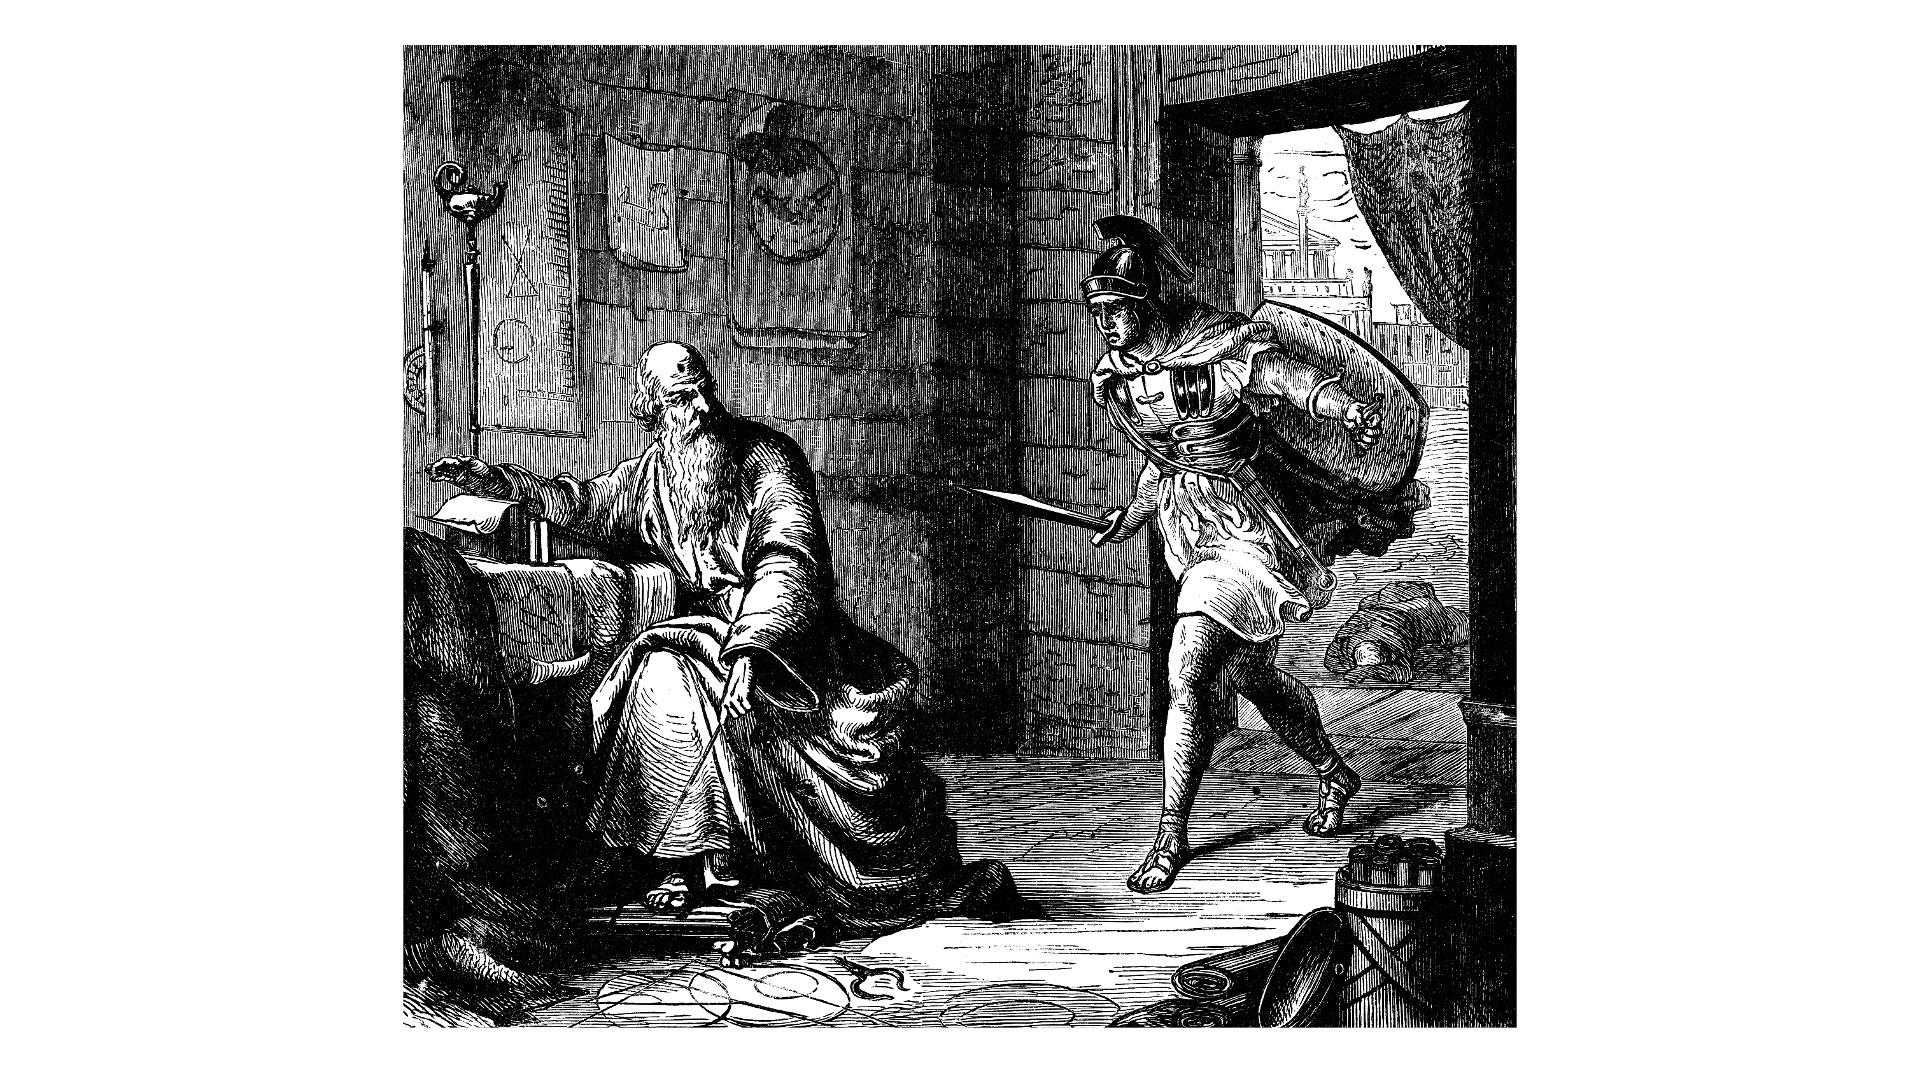 Engraving illustration of the last hour of Archimedes. Here we see him sitting as a desk, drawing symbols on the floor. He is being interrupted by a soldier entering through the doorway who is carrying a sword and shield.